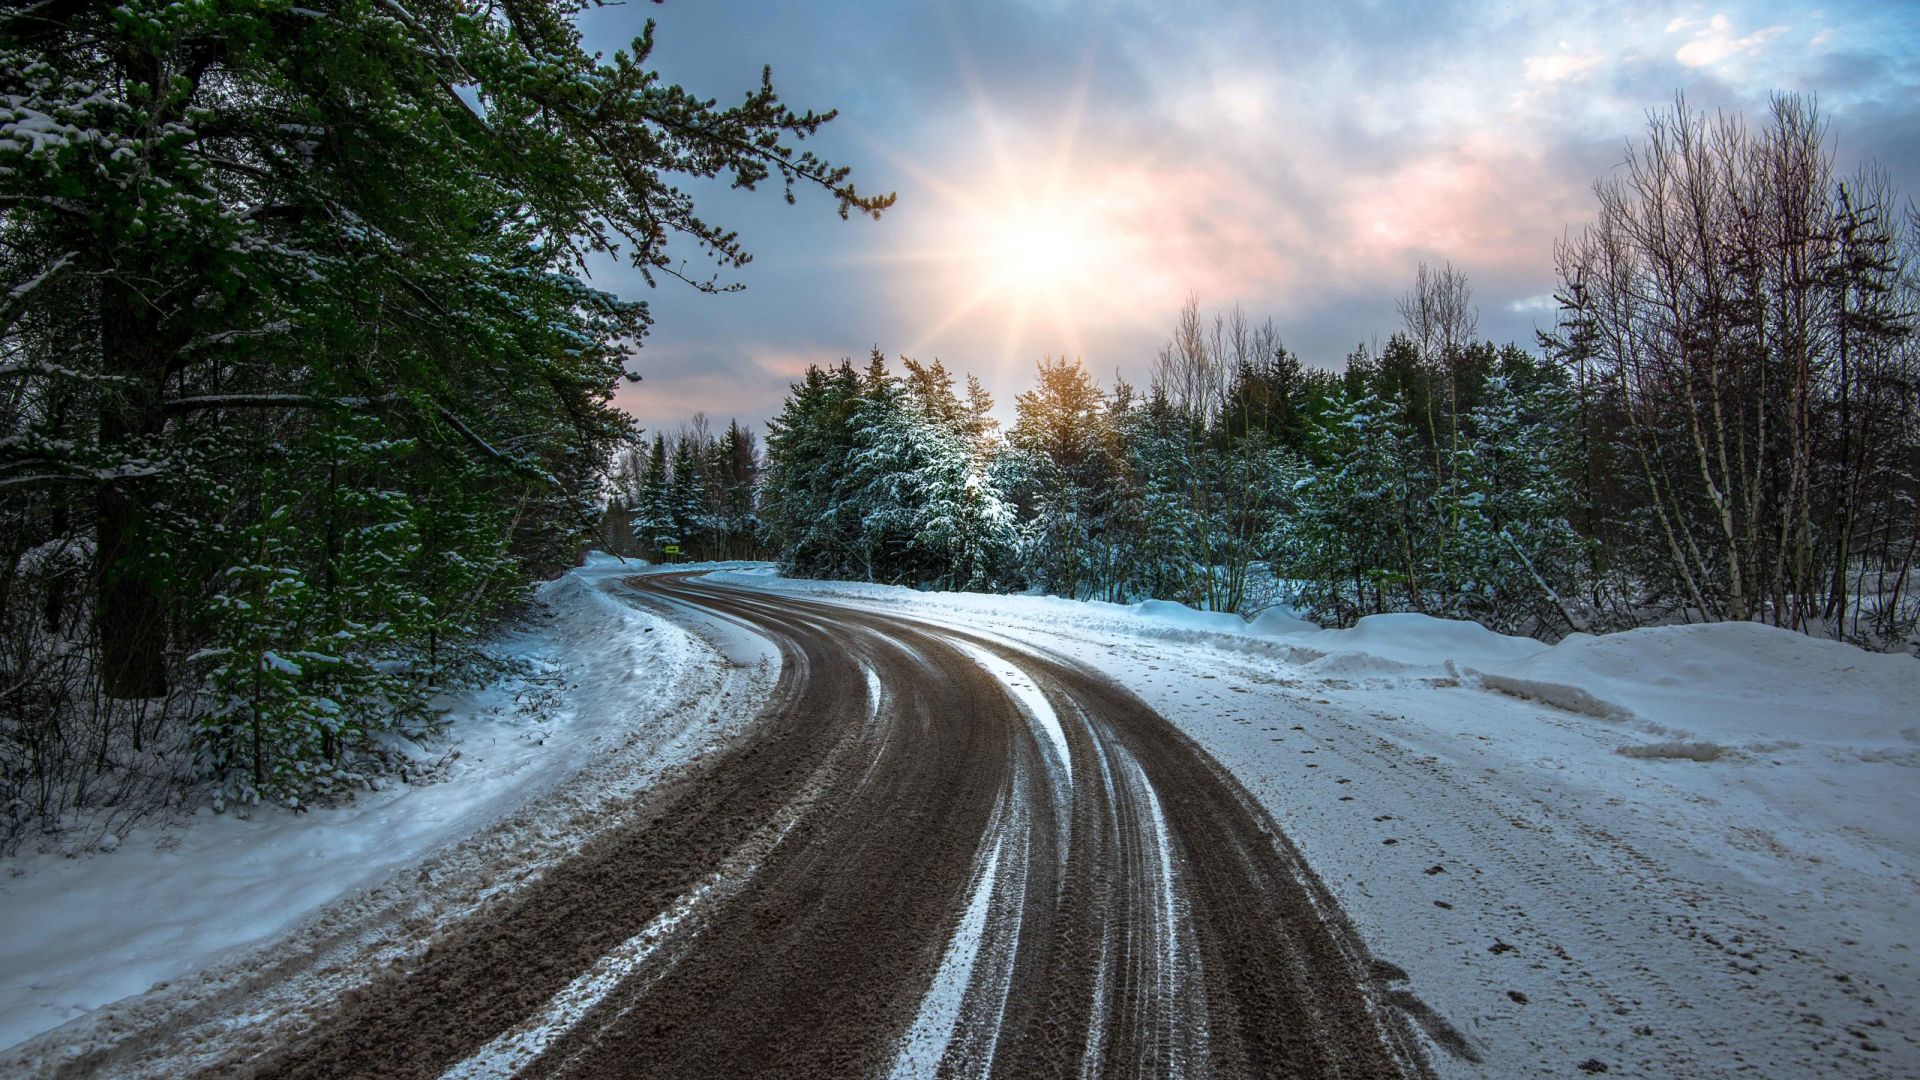 Desktop Wallpaper Nature, Winter, Forest, Clouds, Road, HD Image, Picture, Background, Fbde55